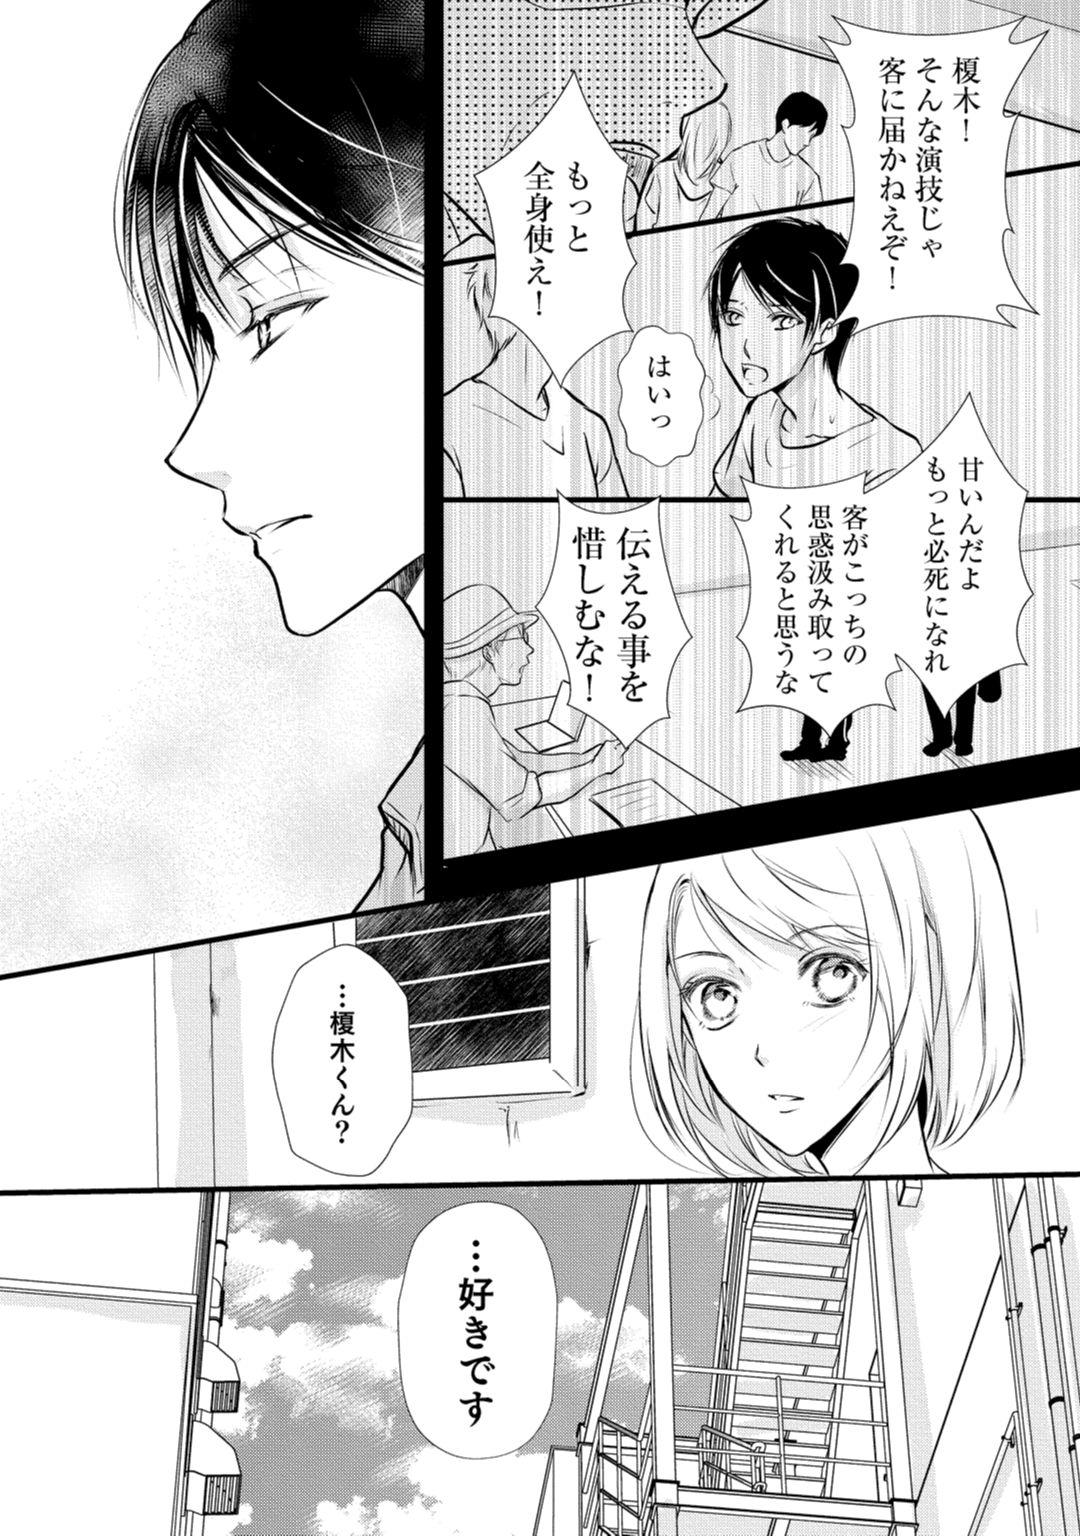 Atm 上司が恋を信じない 後編2 Hot Couple Sex - Page 6